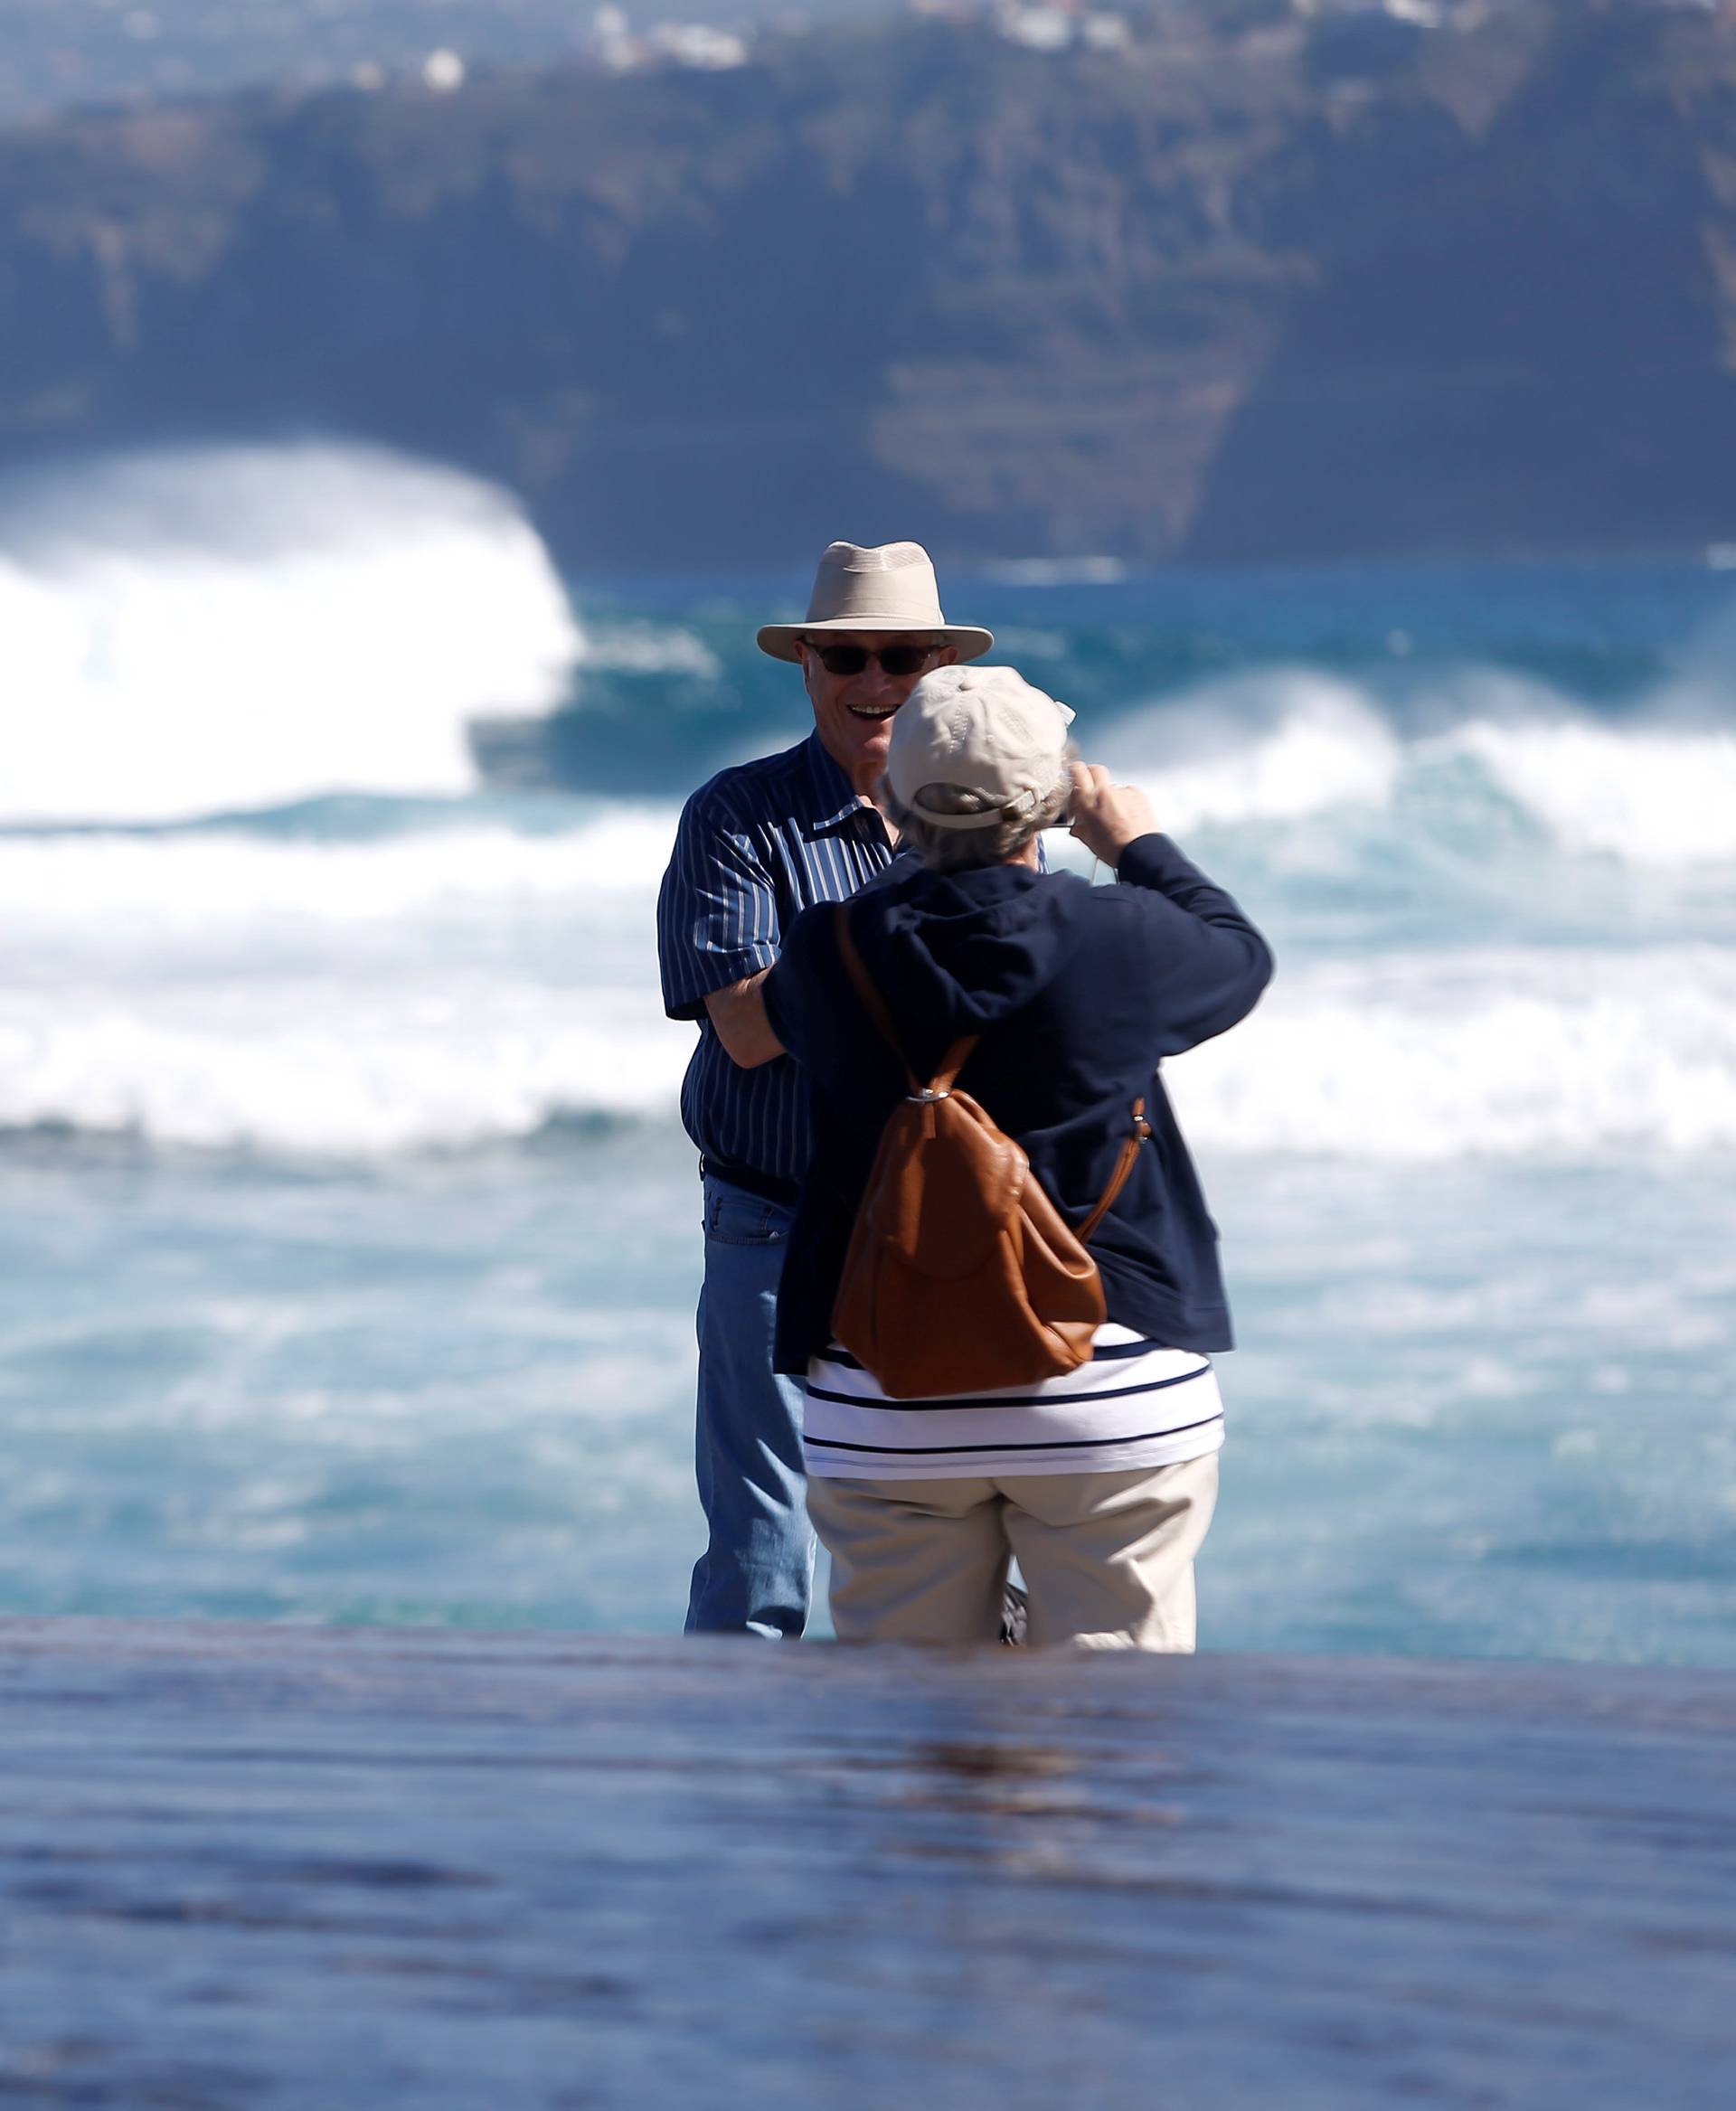 Tourists take photos in Martianez beach on the island of Tenerife in Spain's Canary Islands